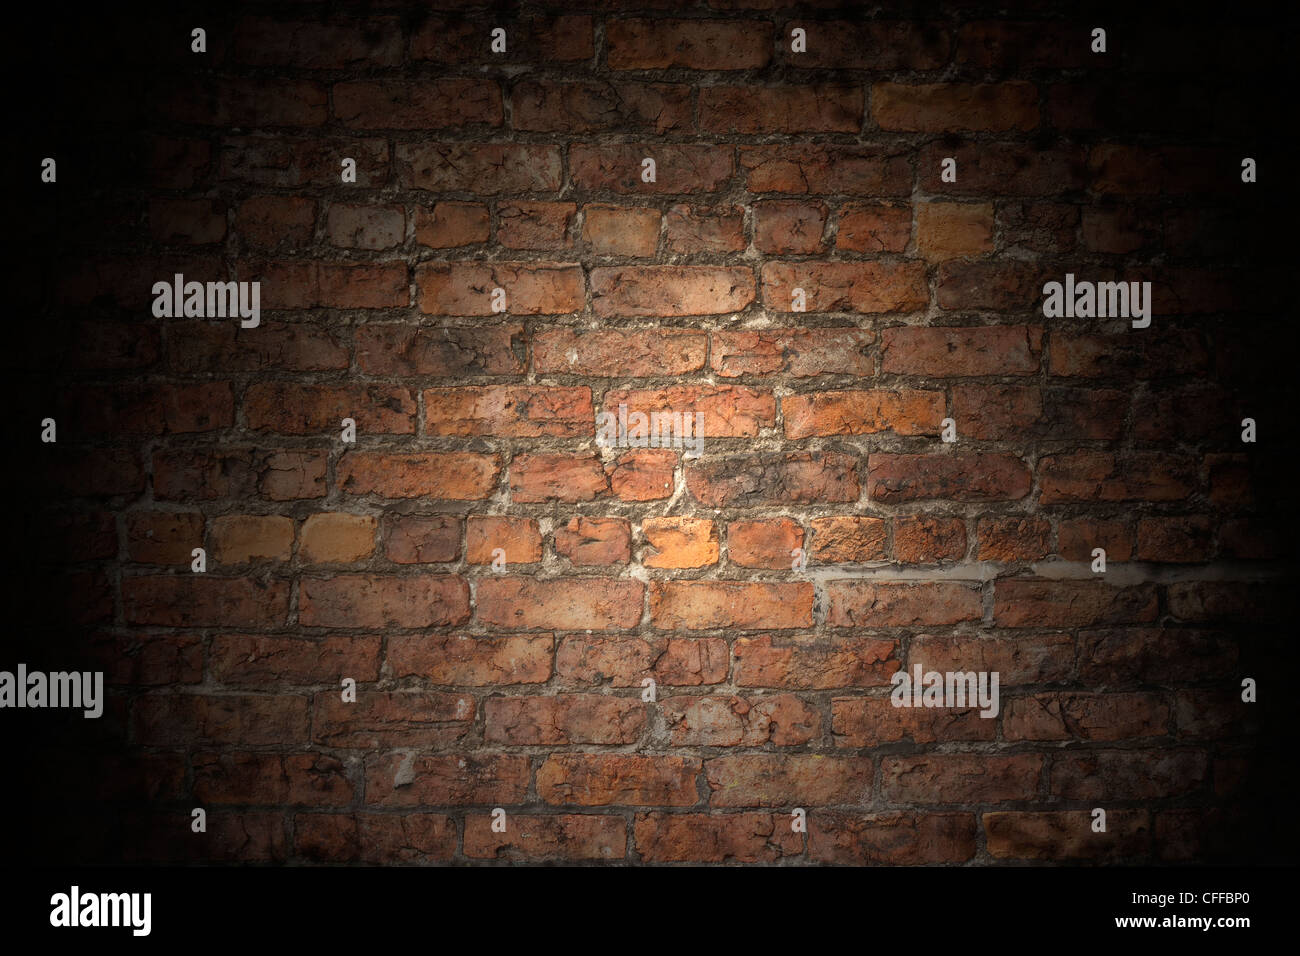 An aged brick wall suitable for use as background or to have graffiti added Stock Photo